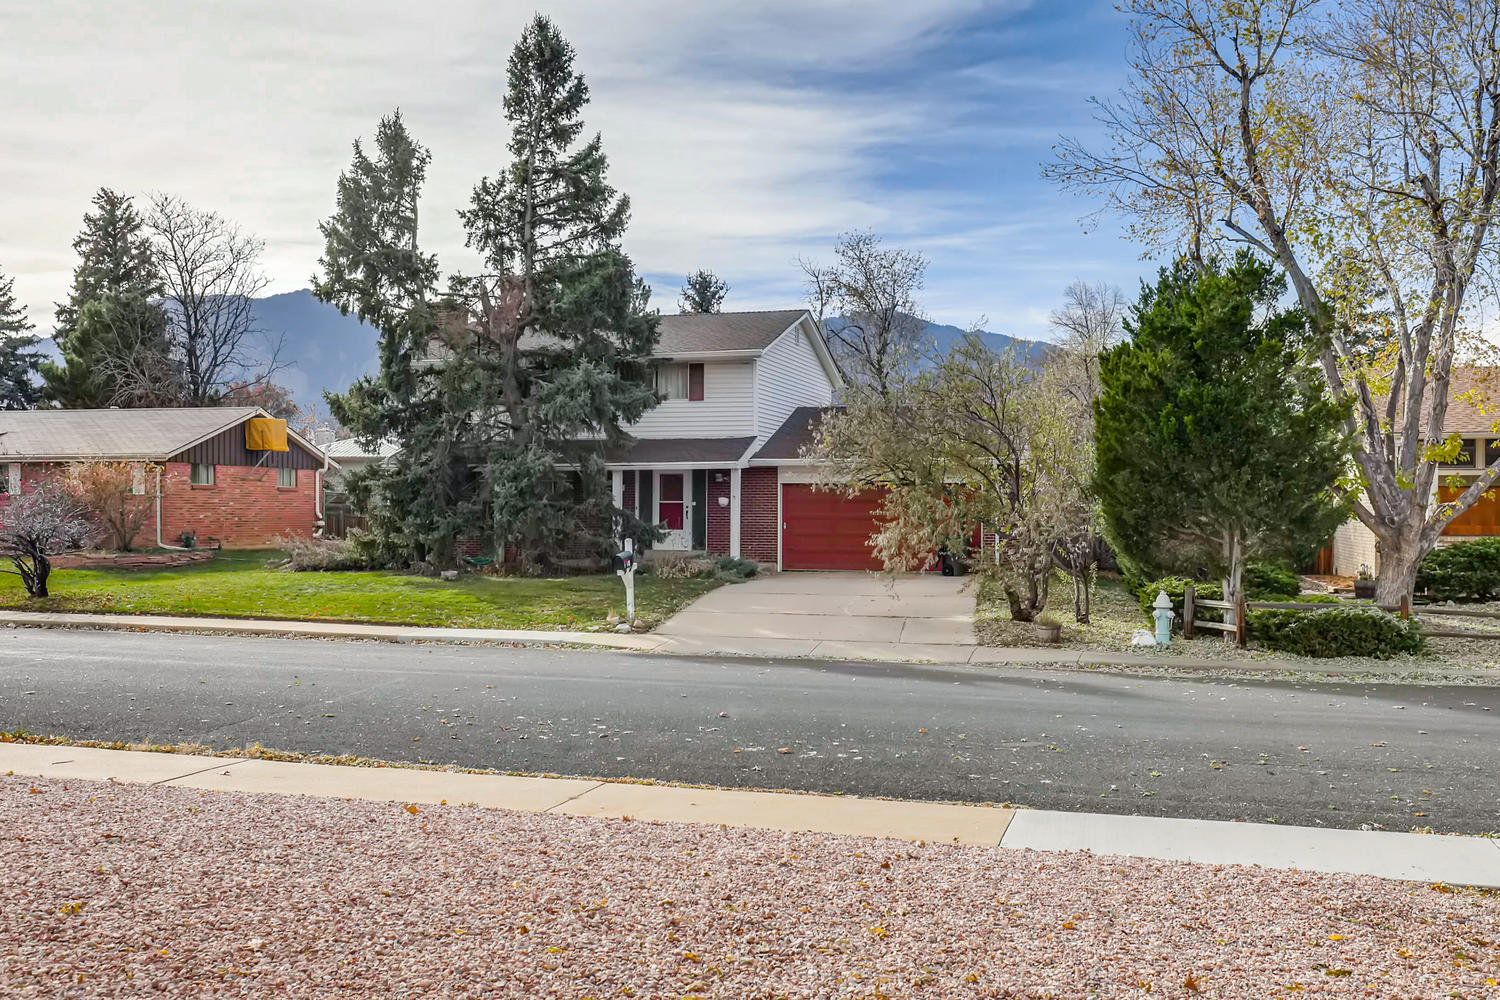 NEW LISTING: 228 Iroquois Dr, Boulder CO 80303 Mountain Views